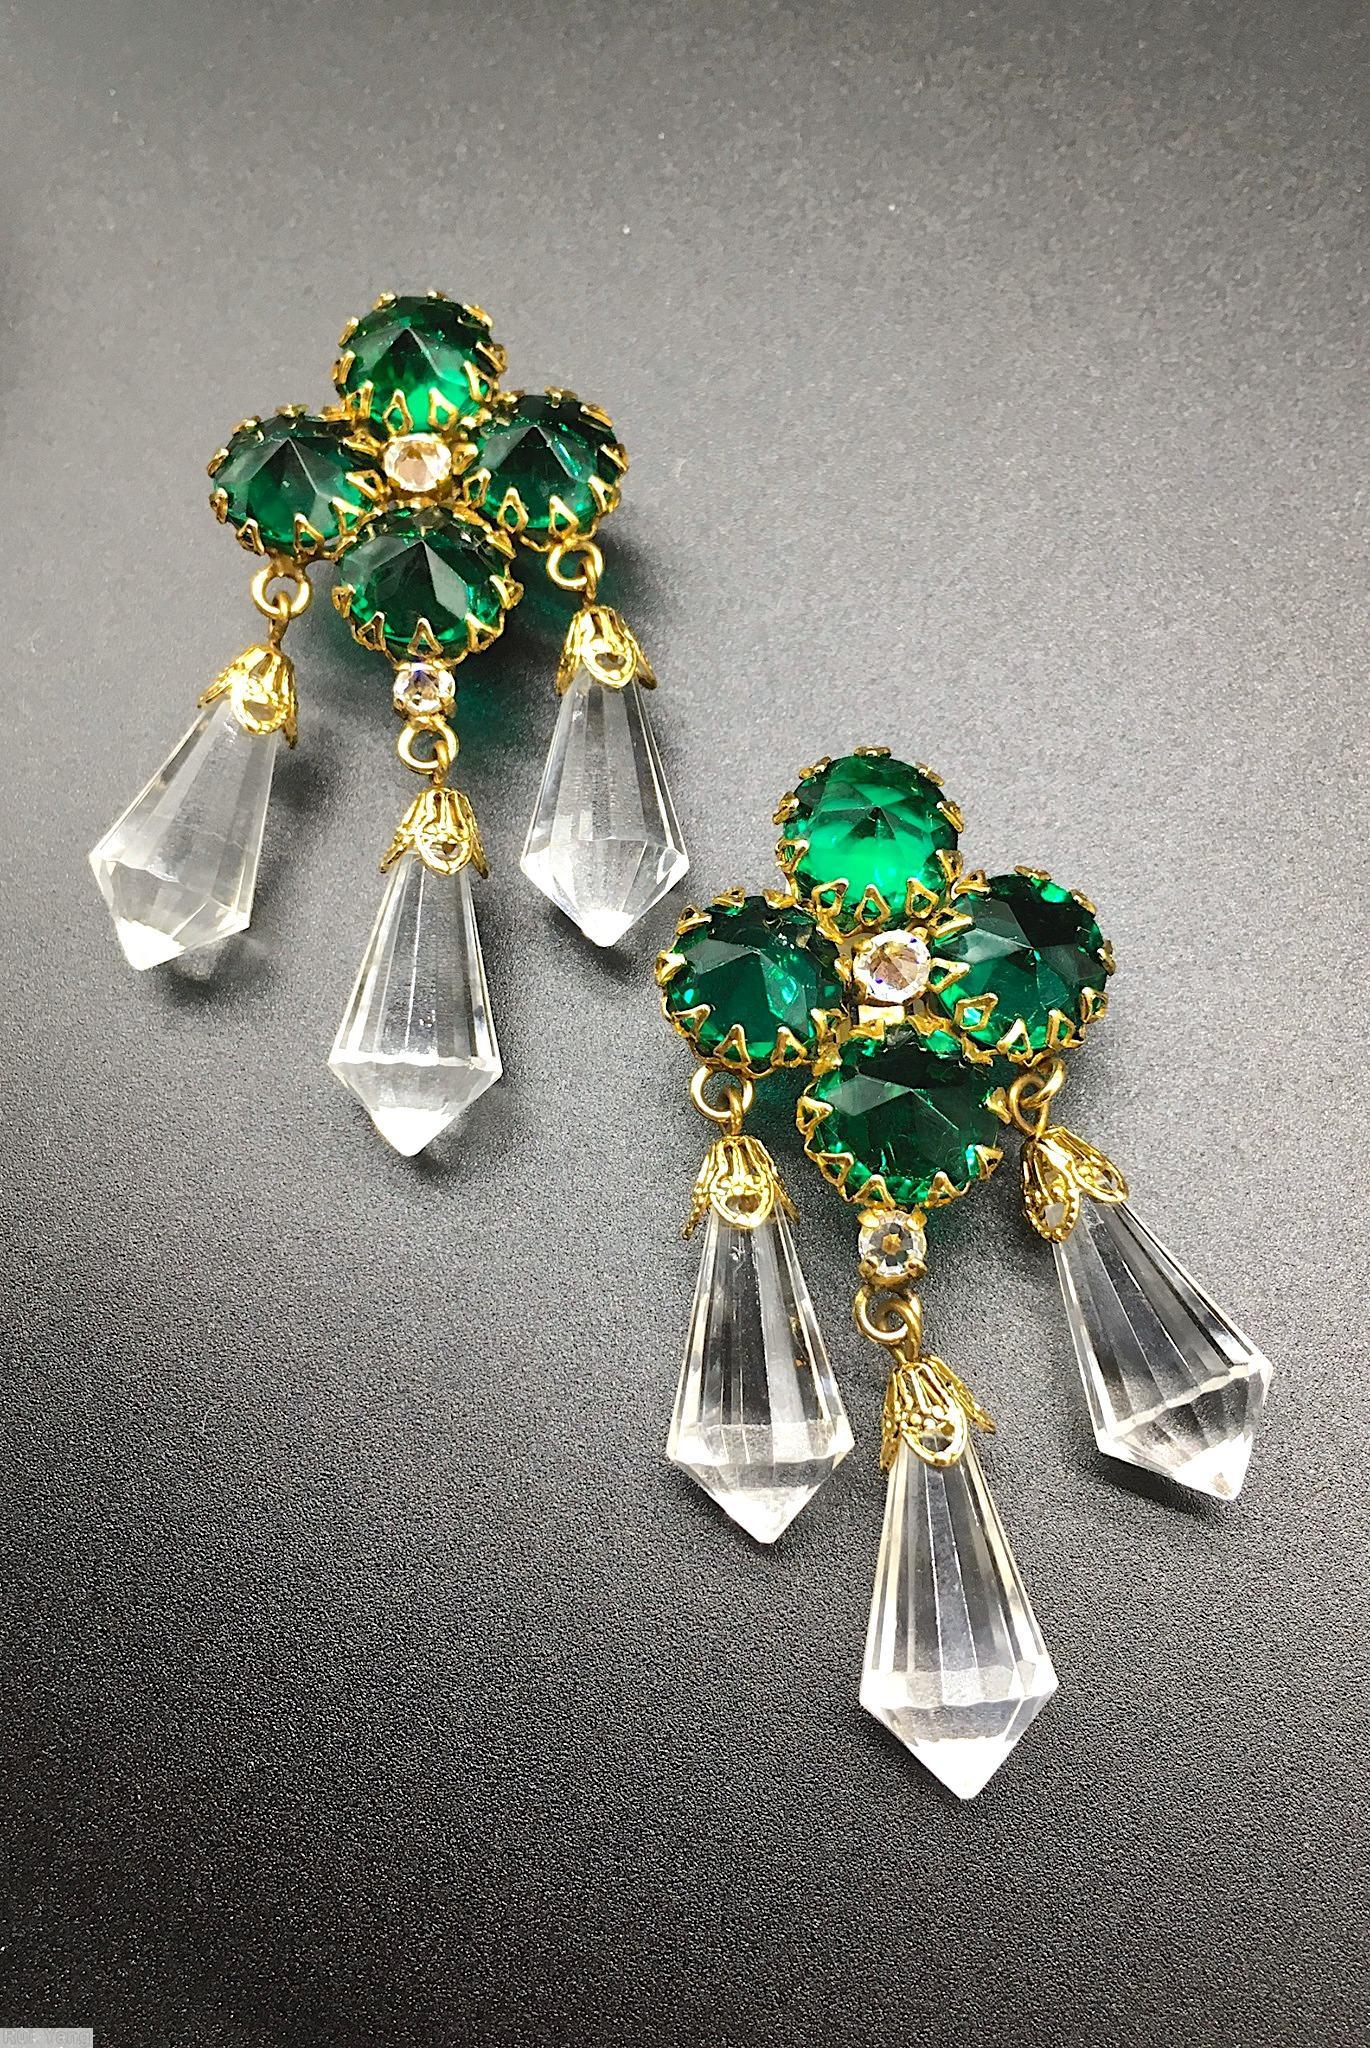 Schreiner 3 dangling teardrop 4 radial chaton lucite bell shaped dangling clear stone emerald inverted chaton goldtone jewelry